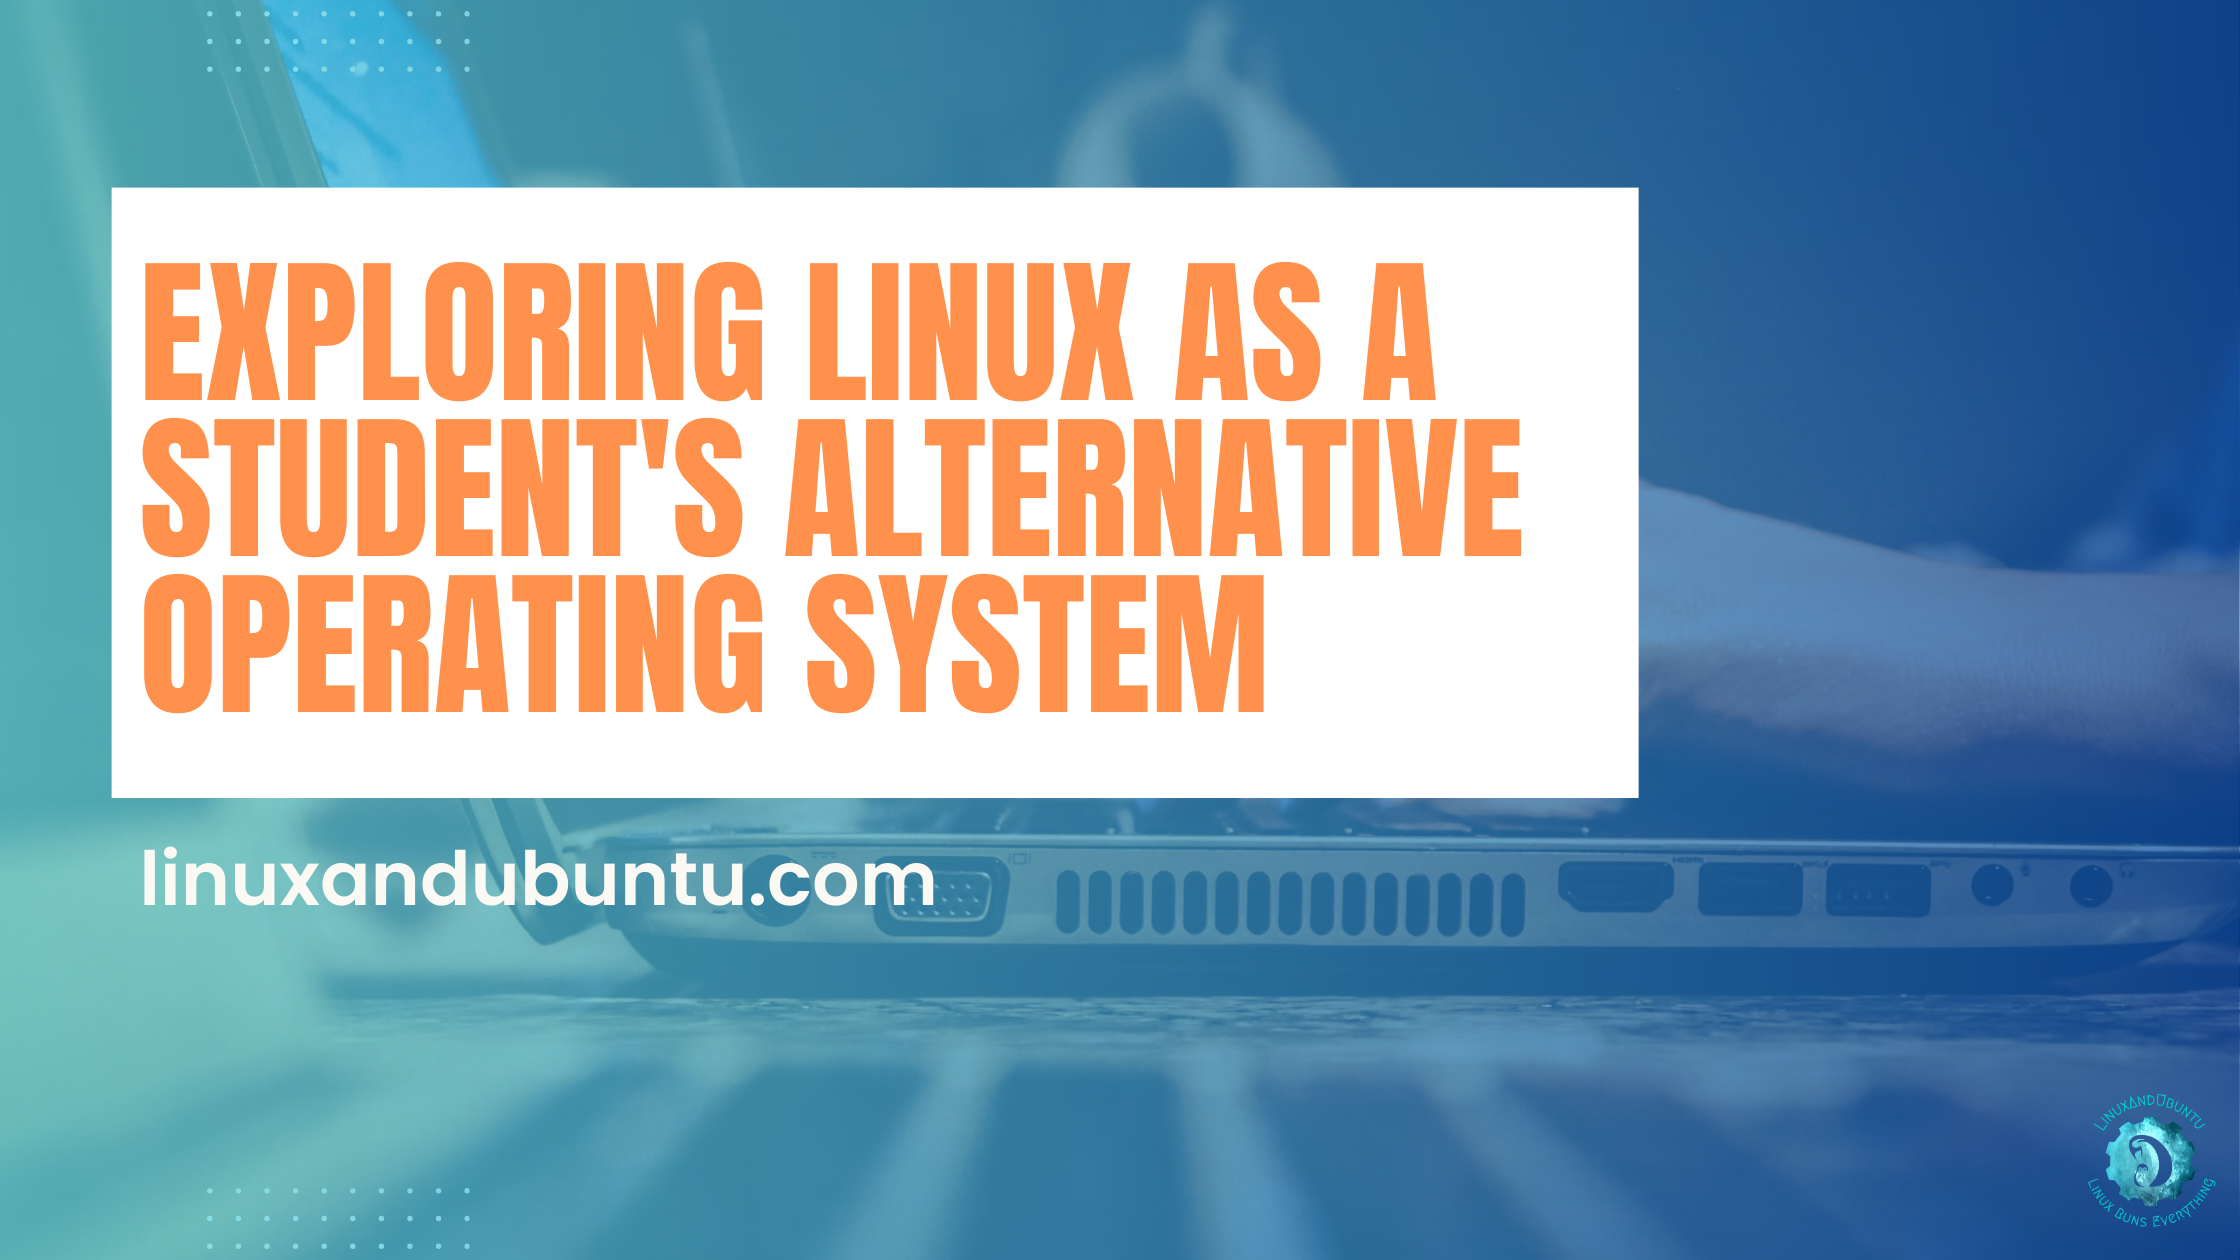 Beyond Windows and MacOS: Exploring Linux as a Student's Alternative Operating System